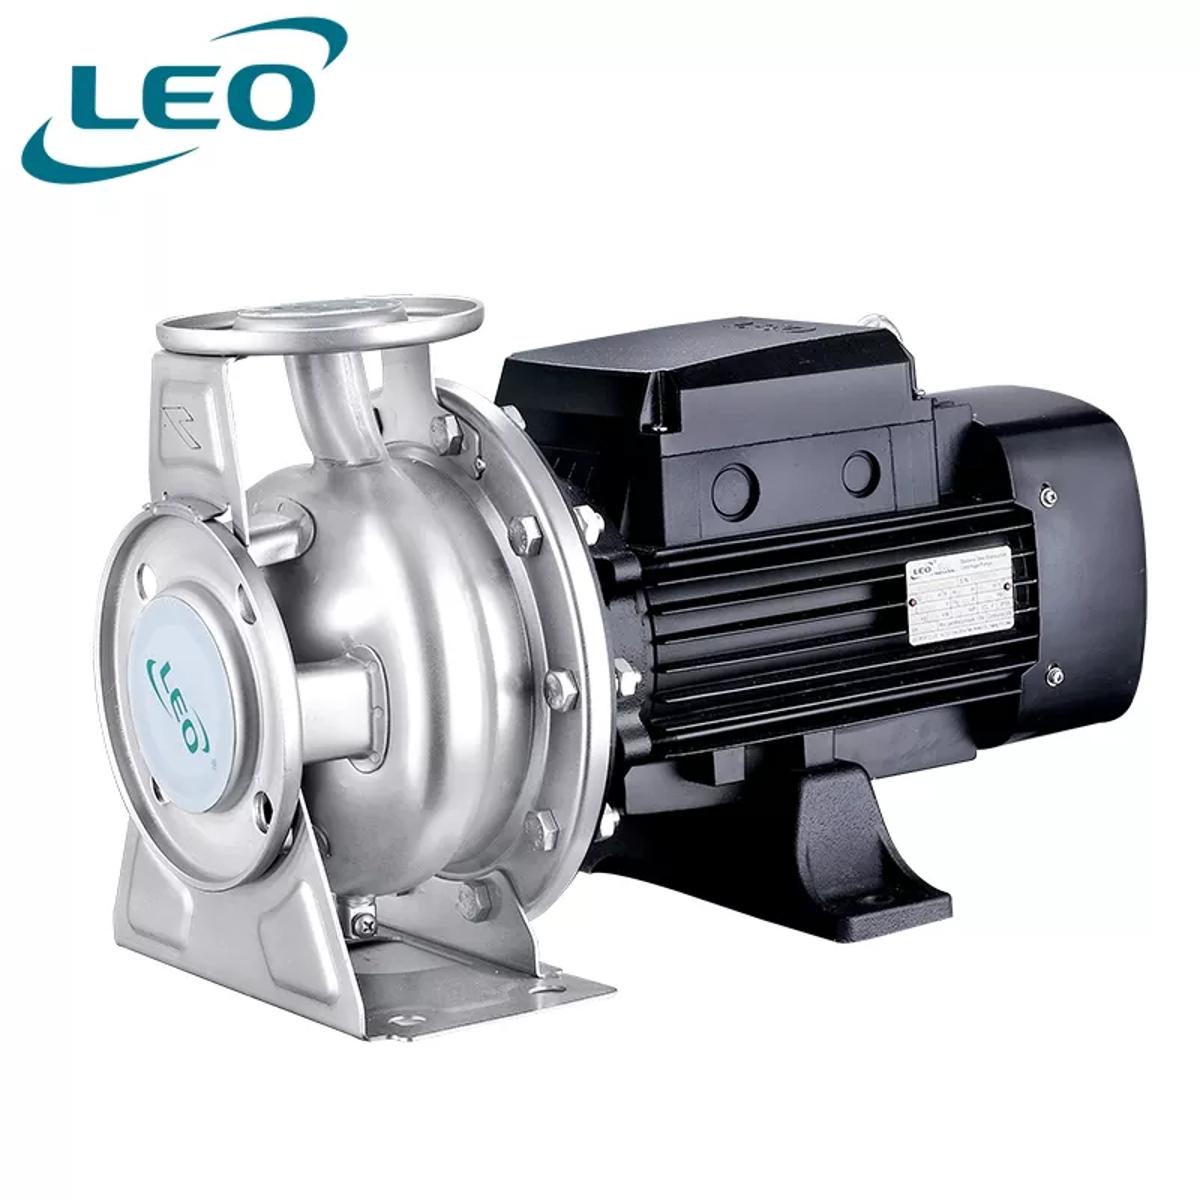 LEO - XZS-65-50-160-40 - 4000 W - 5.5 HP - Clean Water Stainless Steel HEAVY DUTY Centrifugal Pump FLANGE TYPE  - 380V~400V THREE PHASE - SIZE :- 2 1-2 " x 2 " - European STANDARD